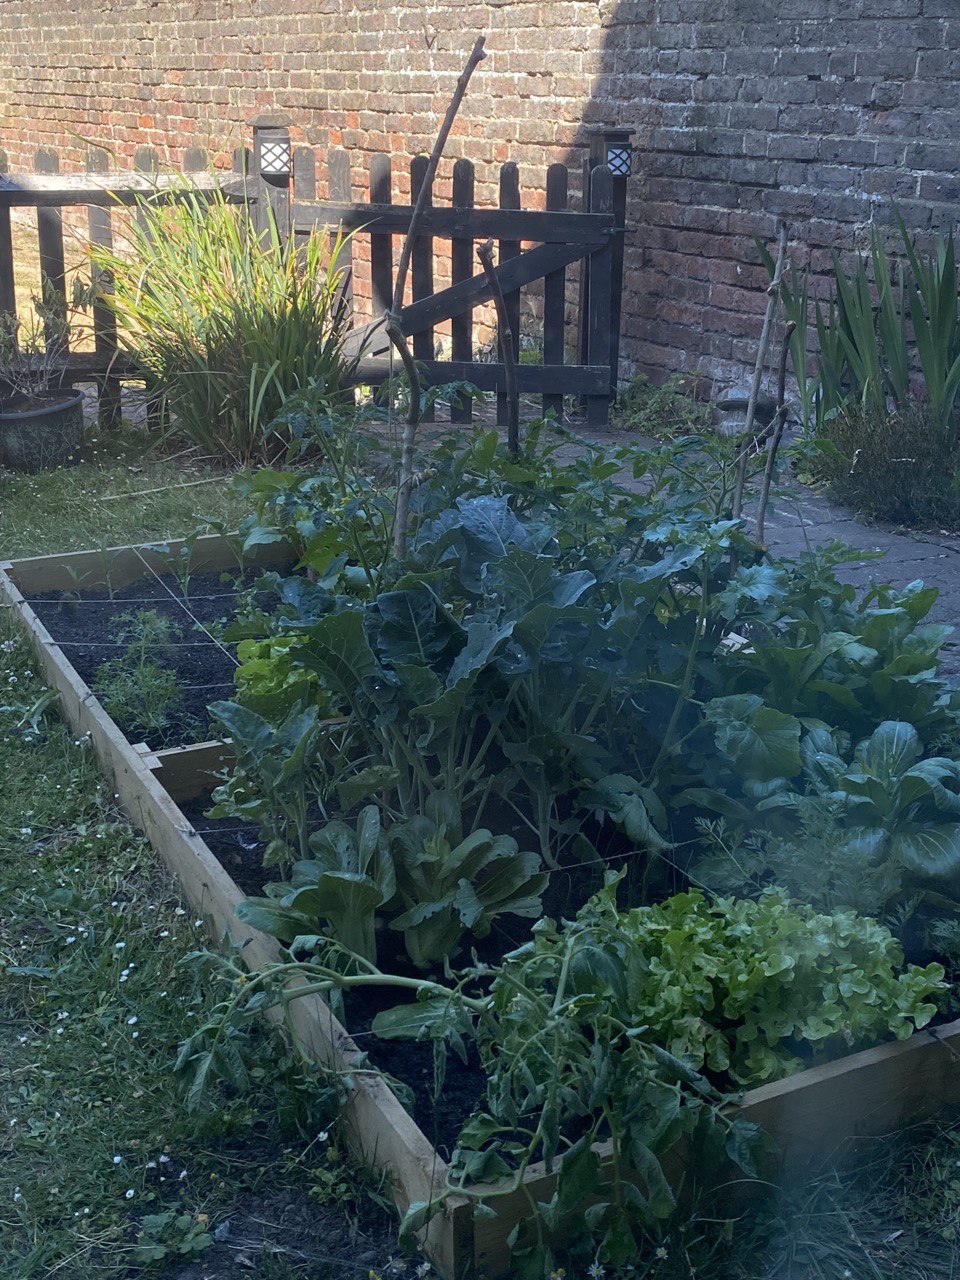 garden bed with vegetables